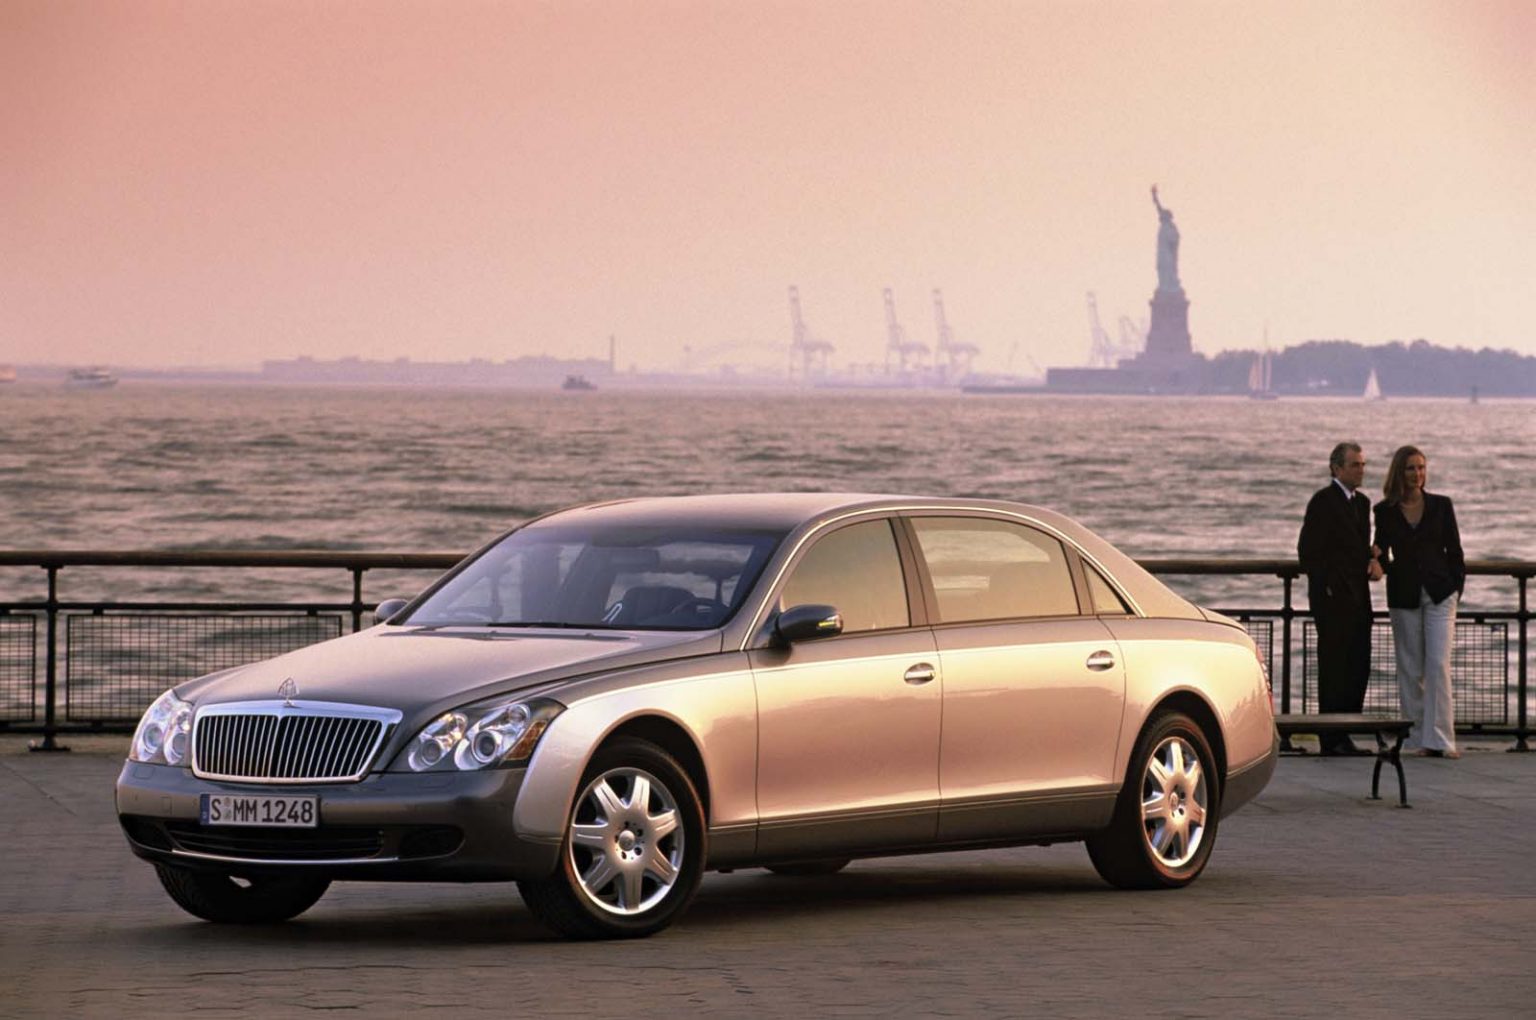 Model series 240 Maybach 62 luxury saloon. Photo from 2003